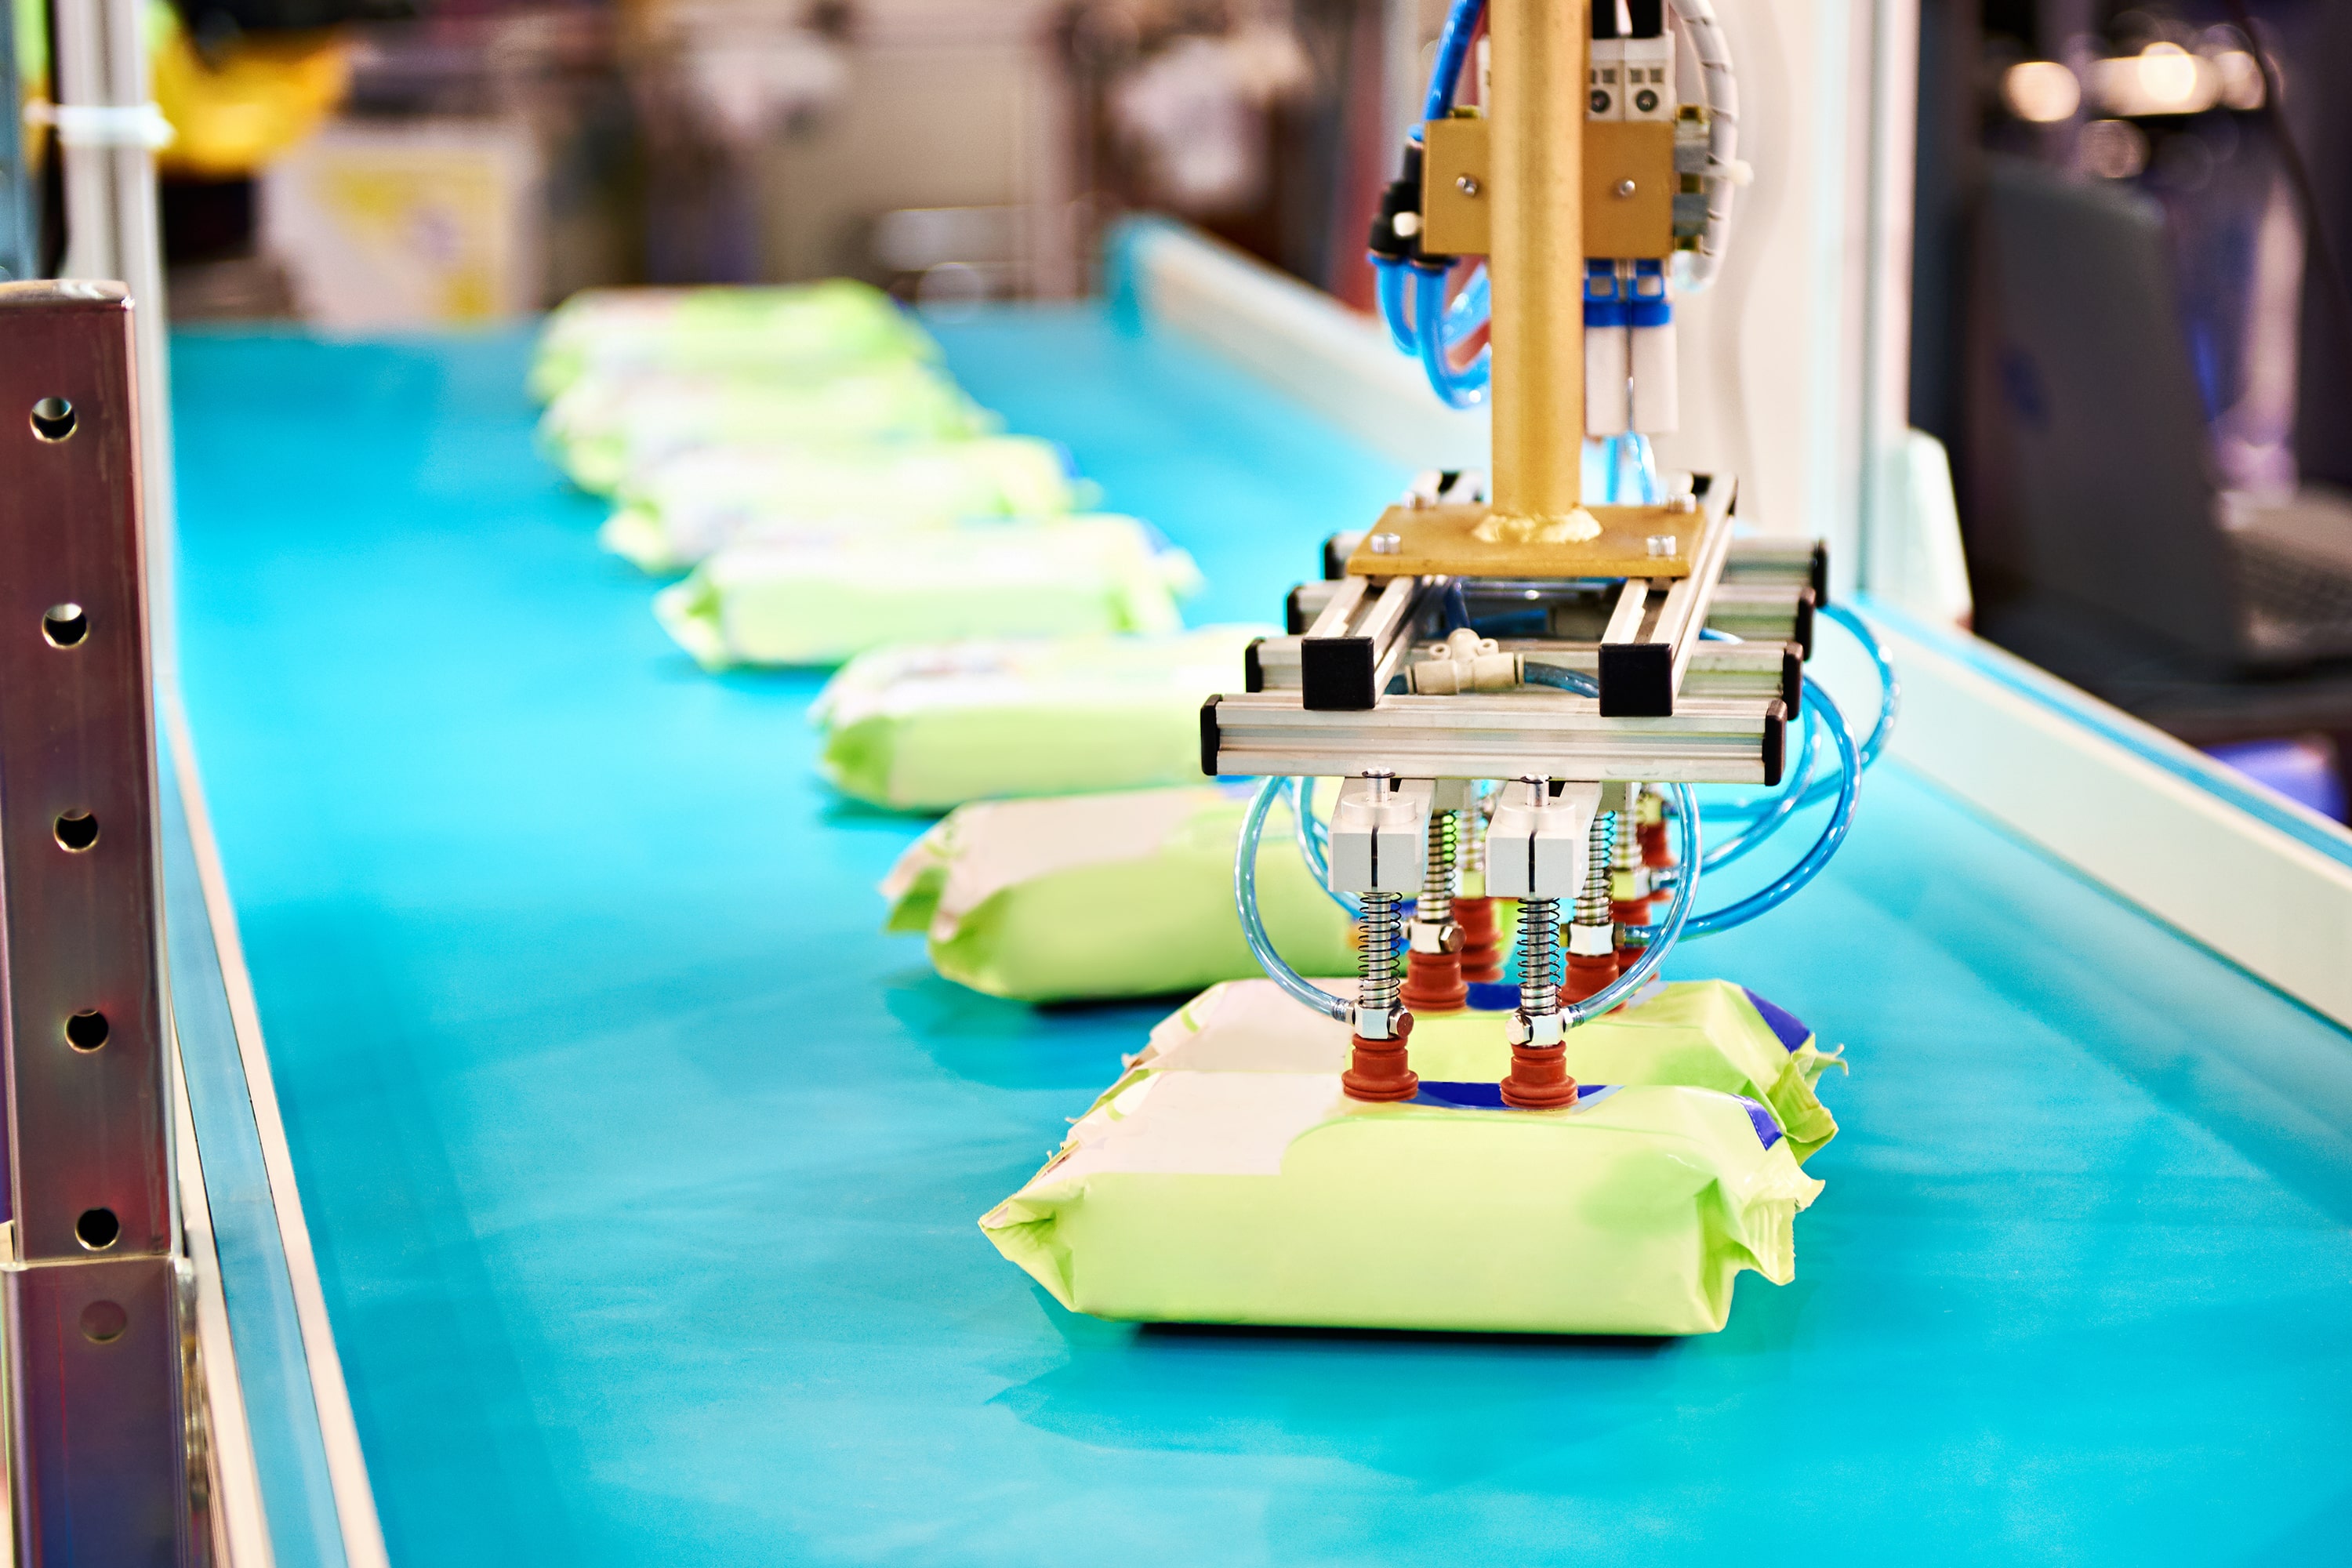 Packaging Robots: Their kinds, Use, and Integration